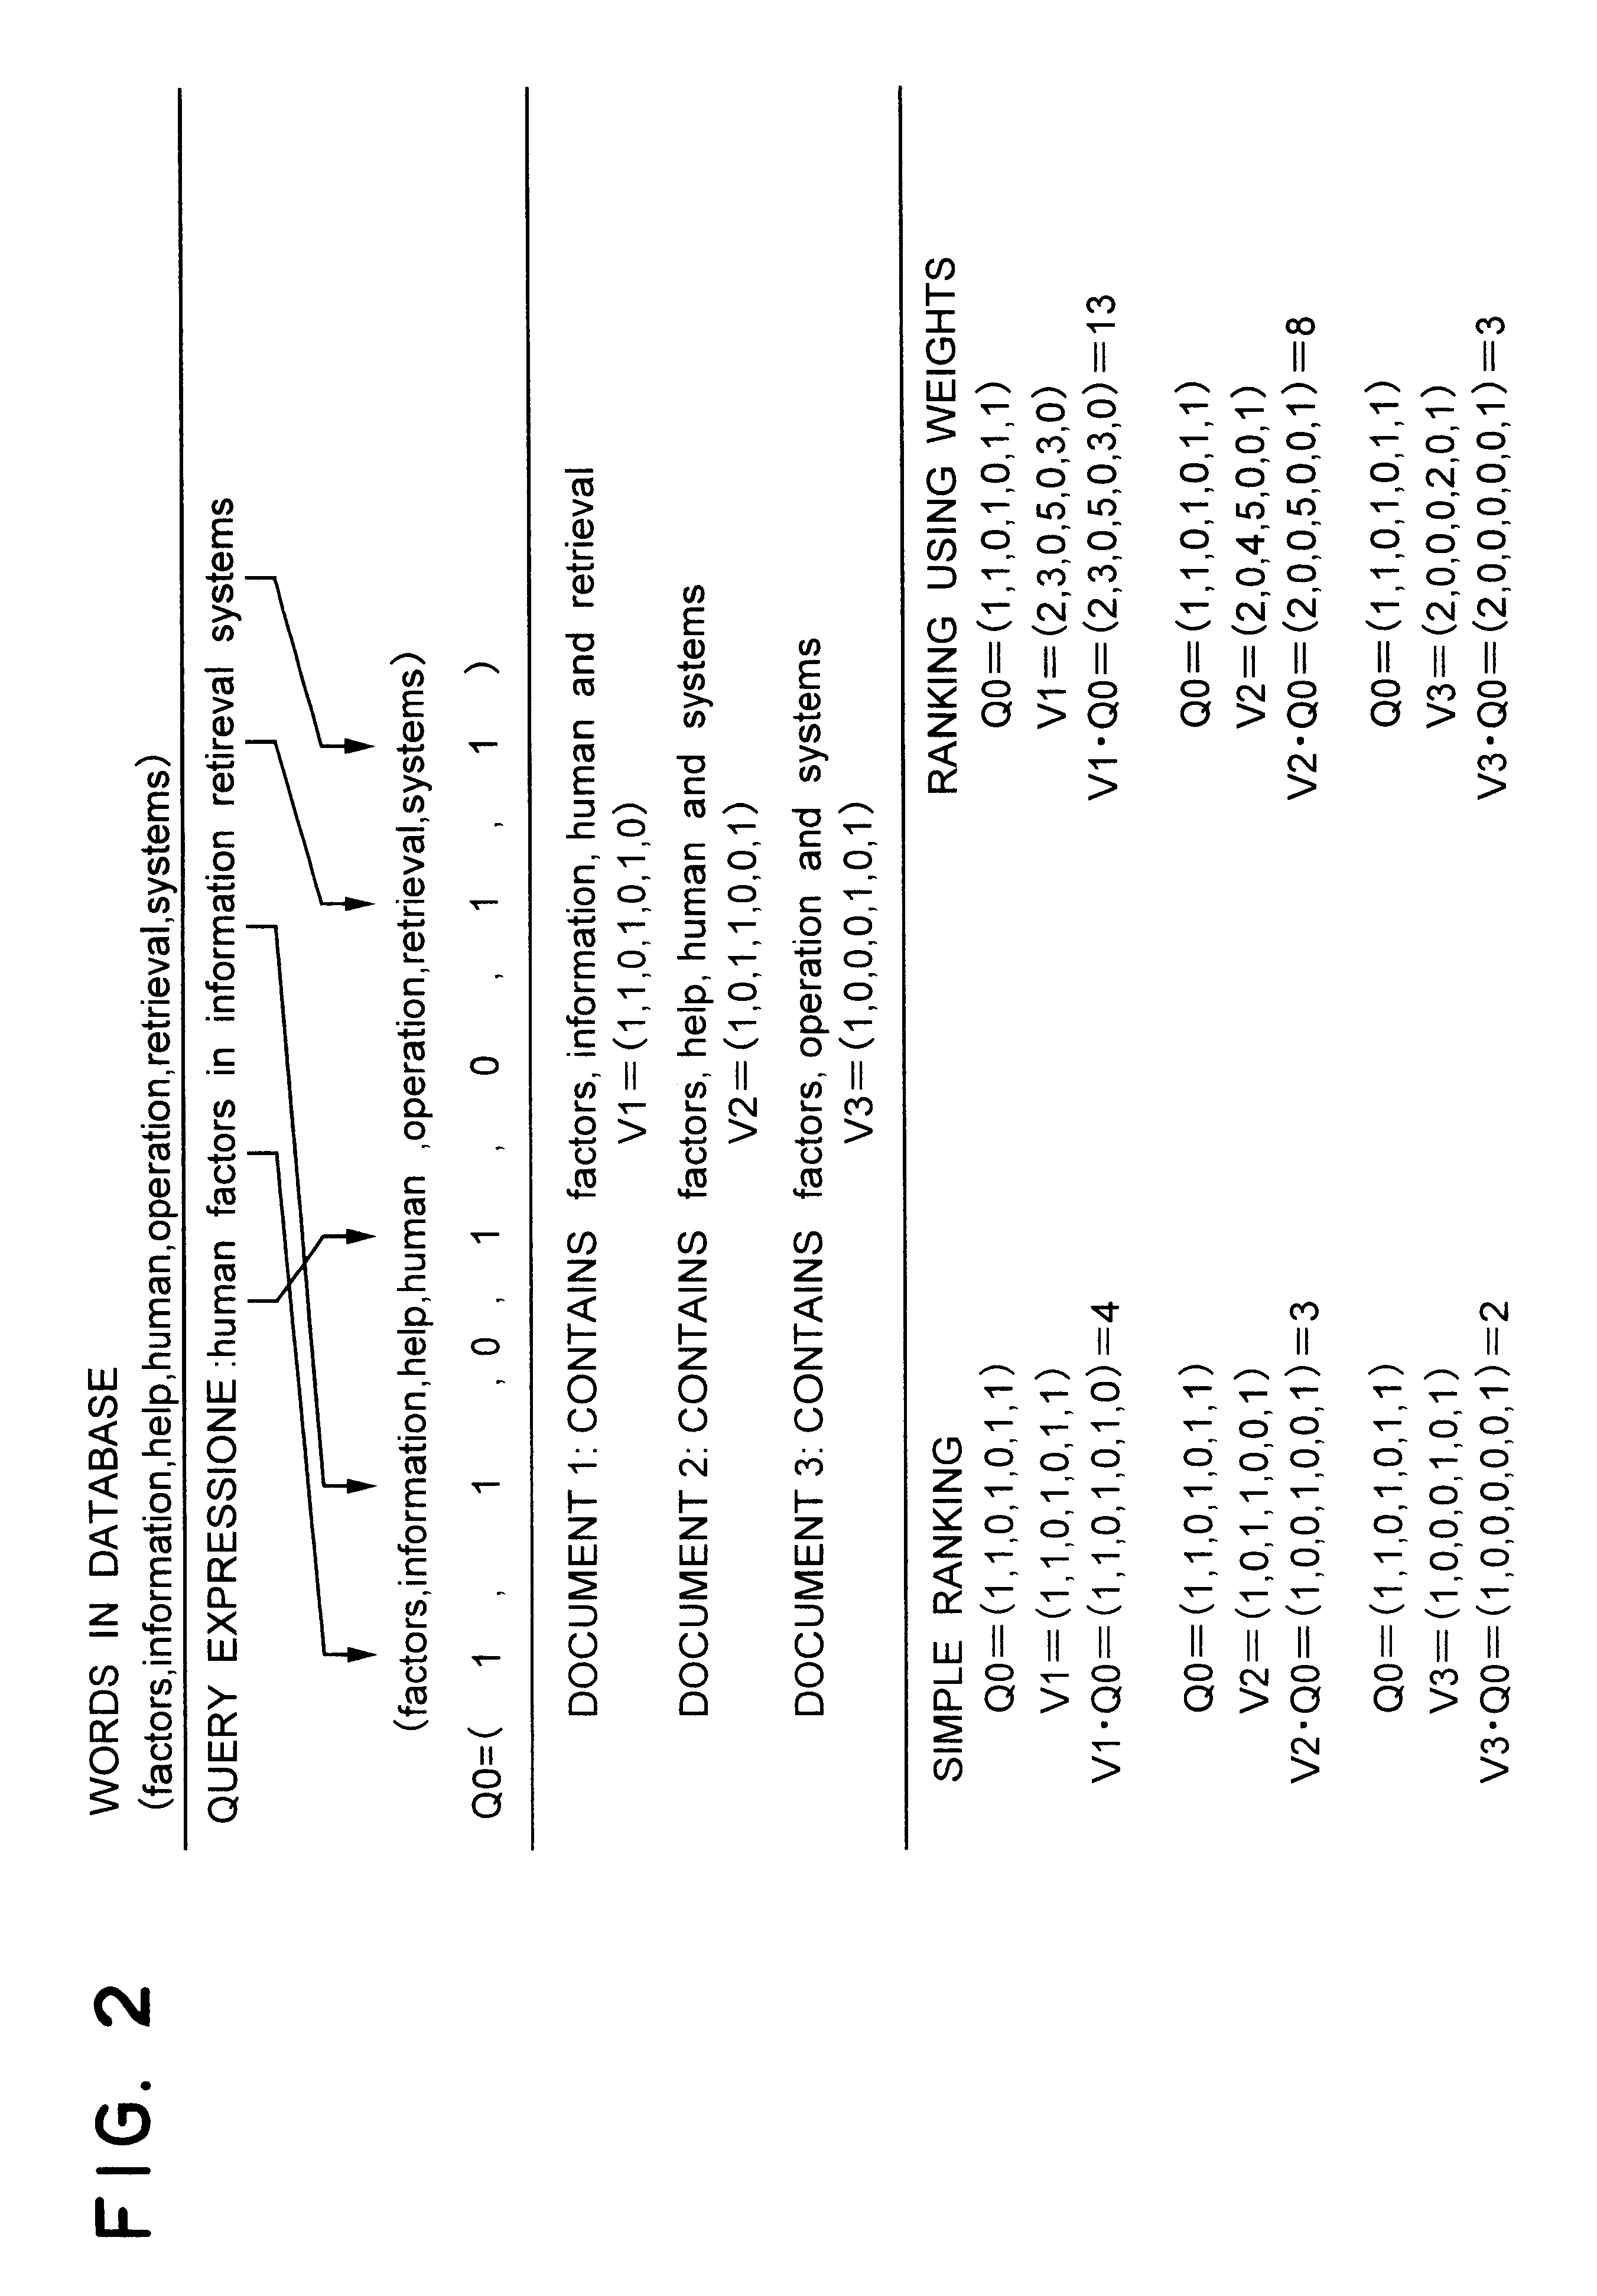 Document retrieval method and system and computer readable storage medium